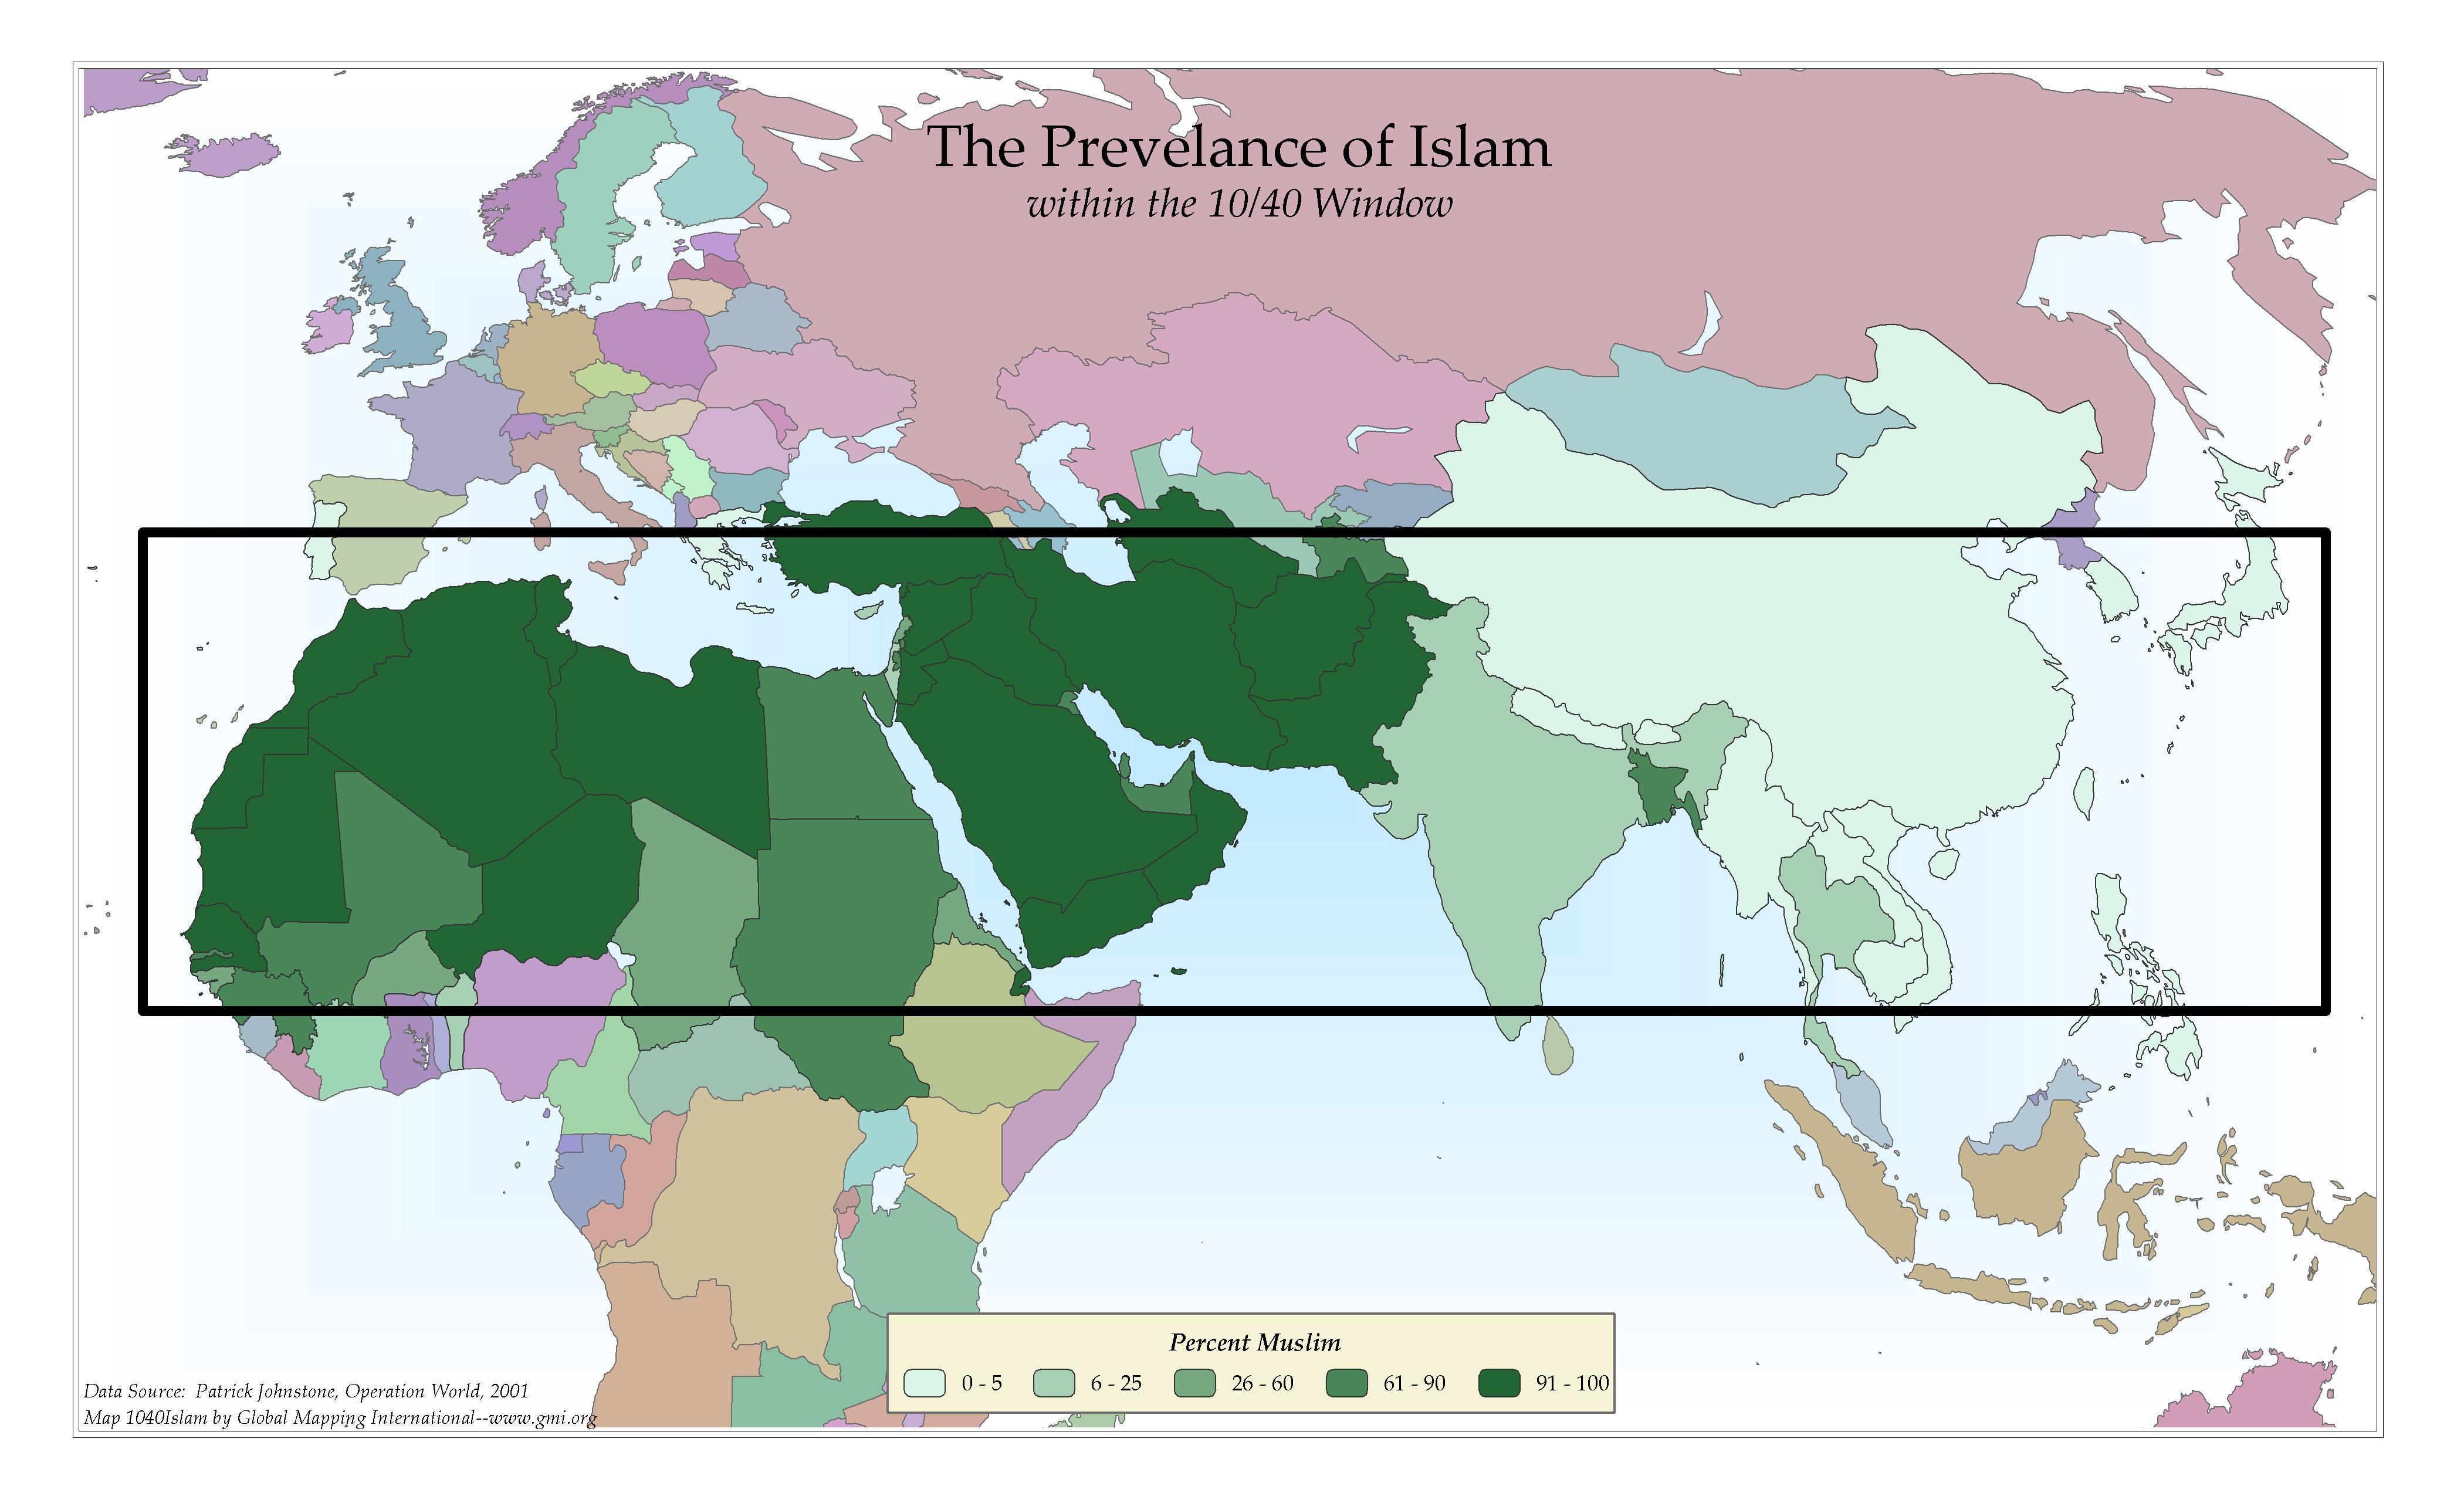 The Prevelance of Islam within the 10/40 Window